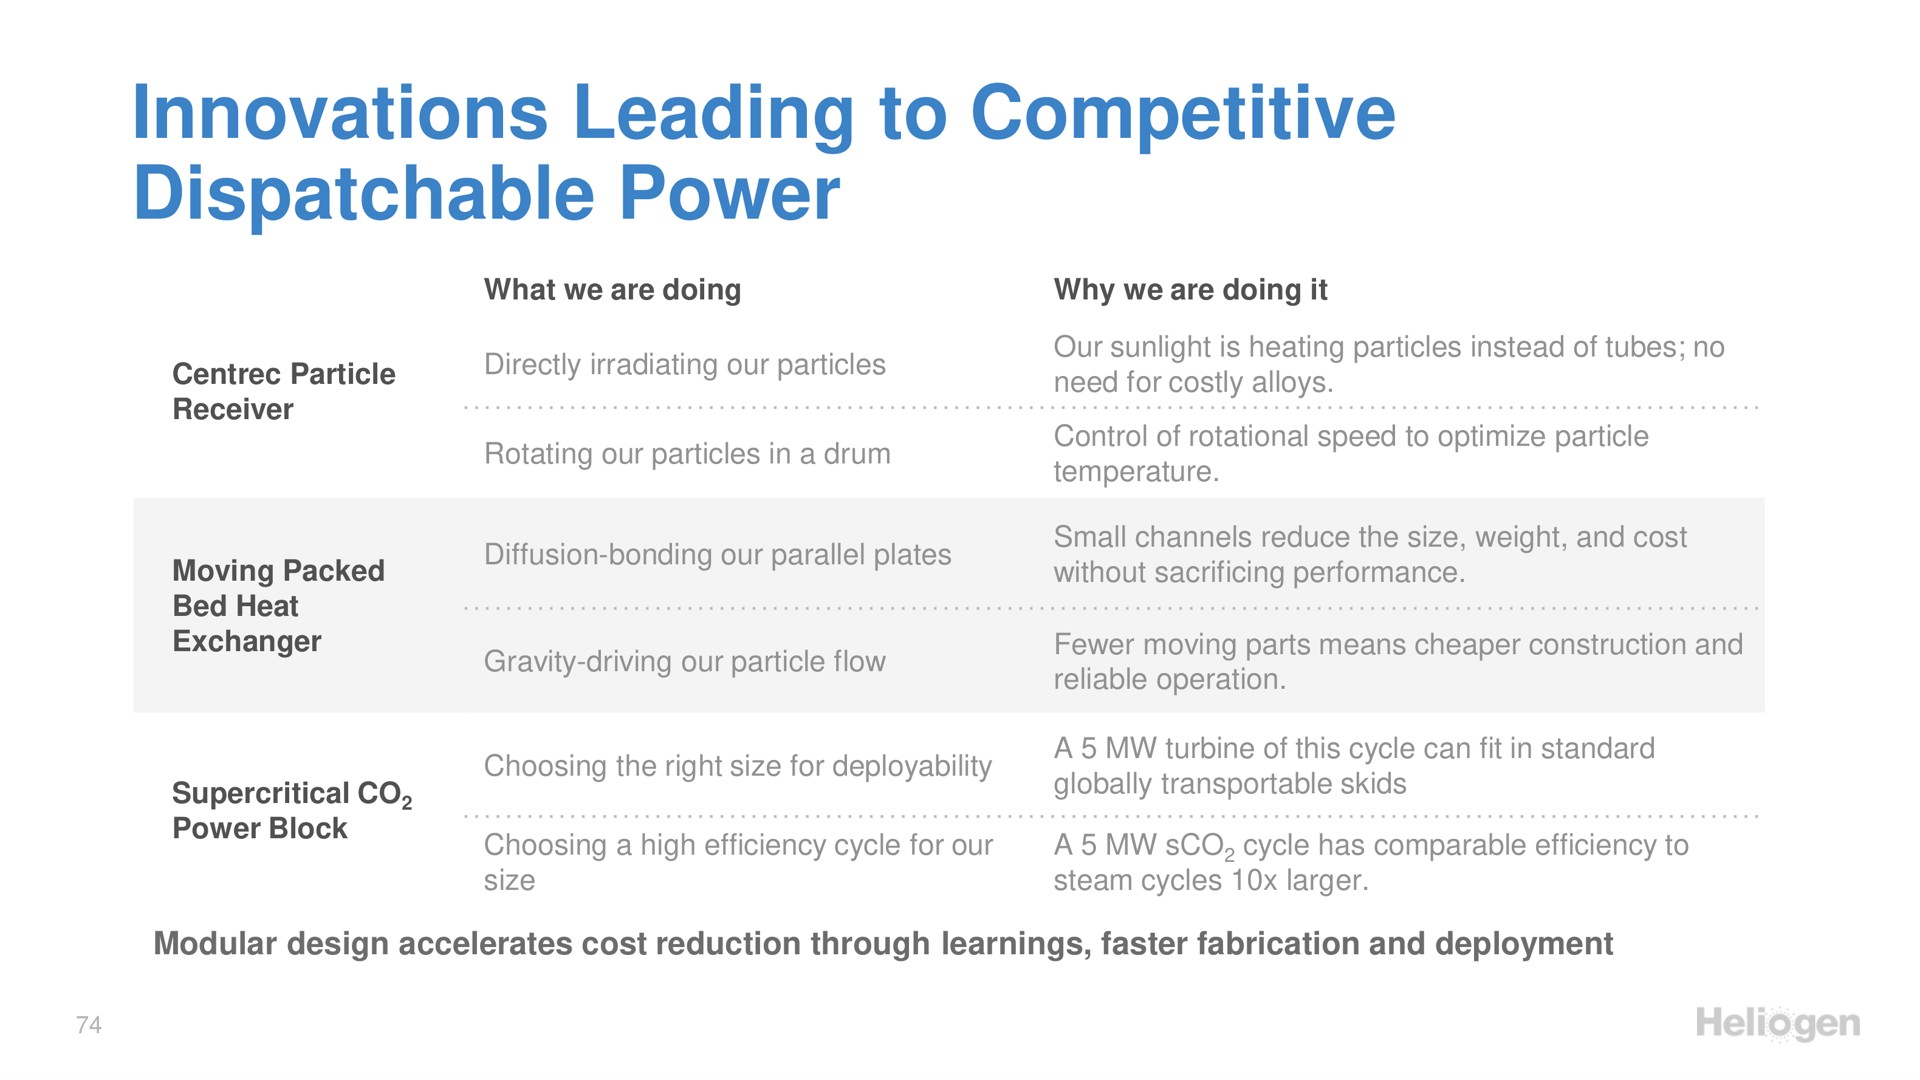 innovations leading to competitive power | Heliogen